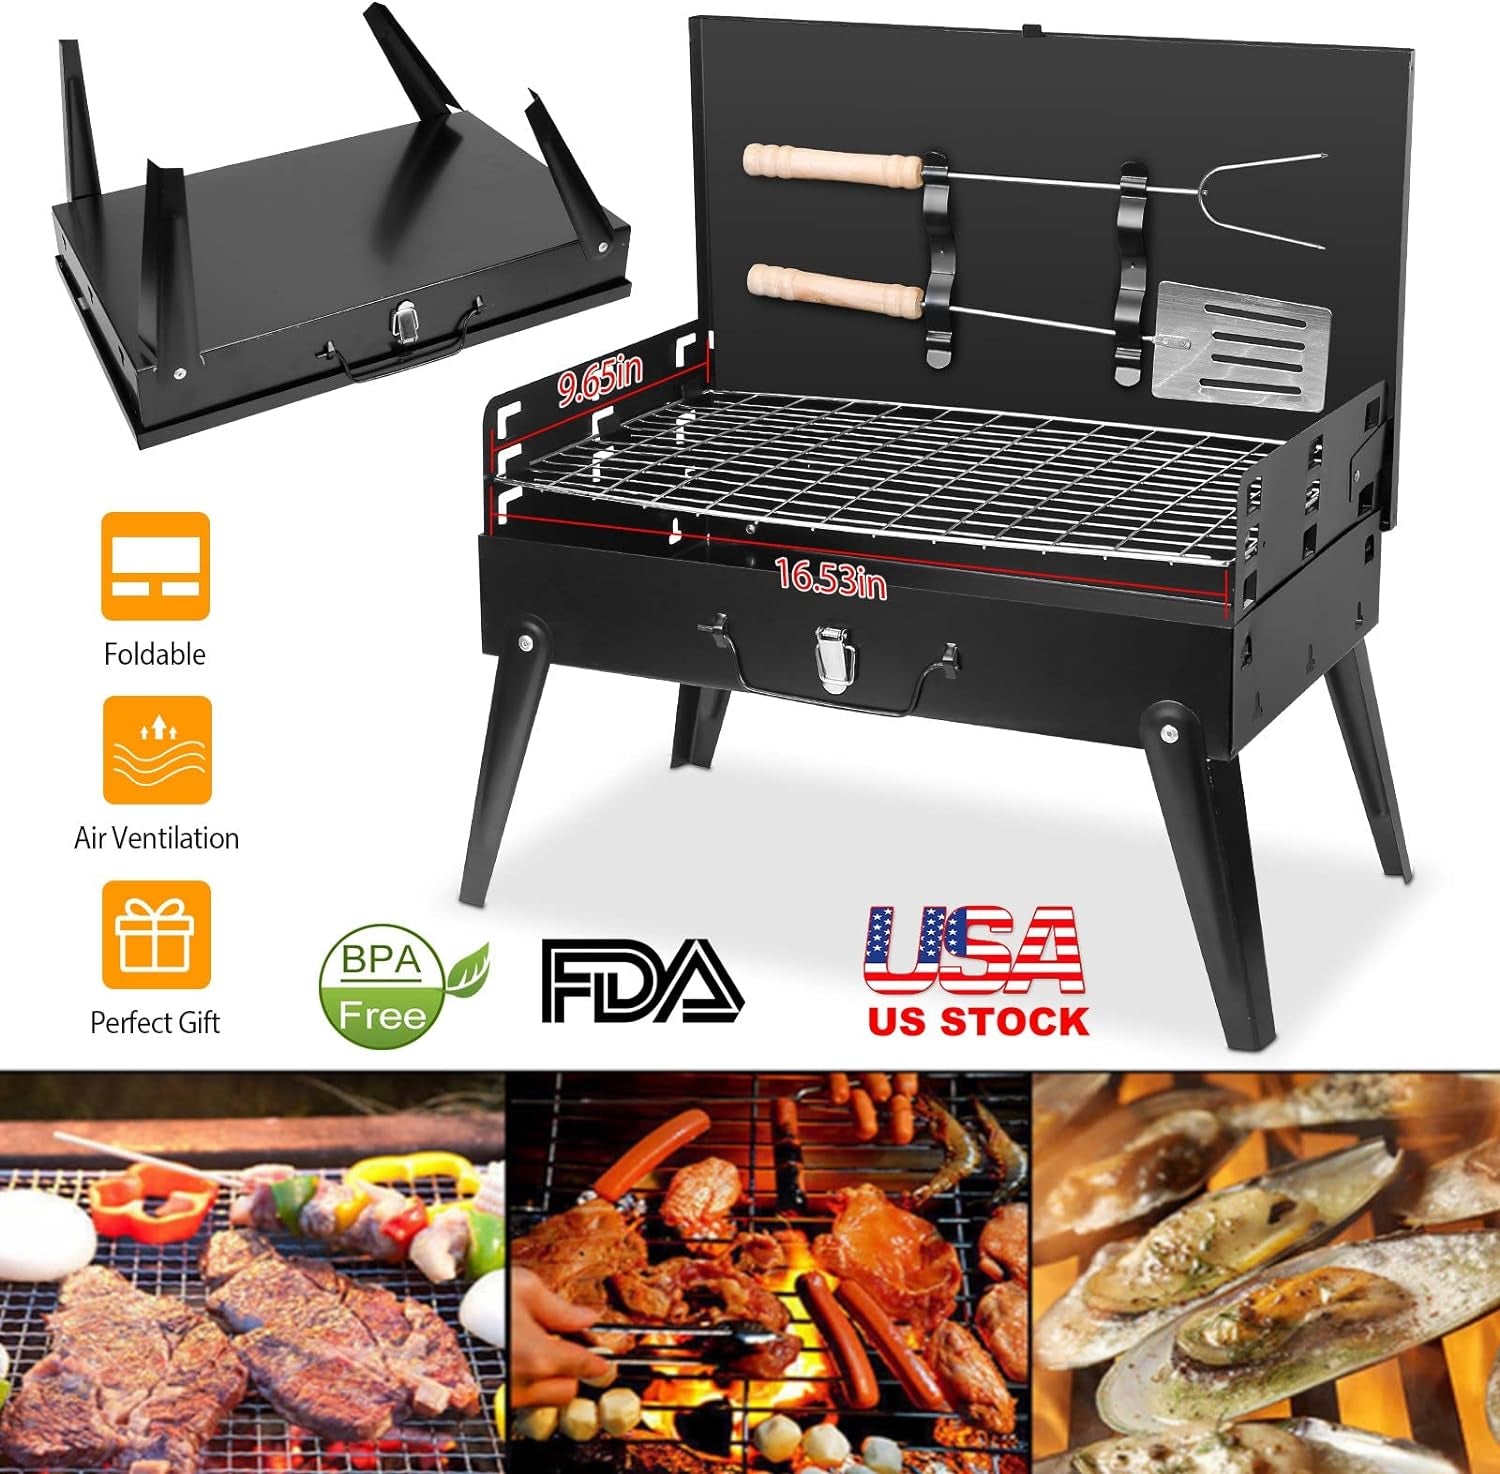 Portable Charcoal Grill, Small BBQ Grill Outdoor Folding Barbecue Grill, Foldable Camping Grill with Barbecue Accessories & Lid for Outdoor Cooking Camp Picnic Hiking Beach Party Patio Smokers